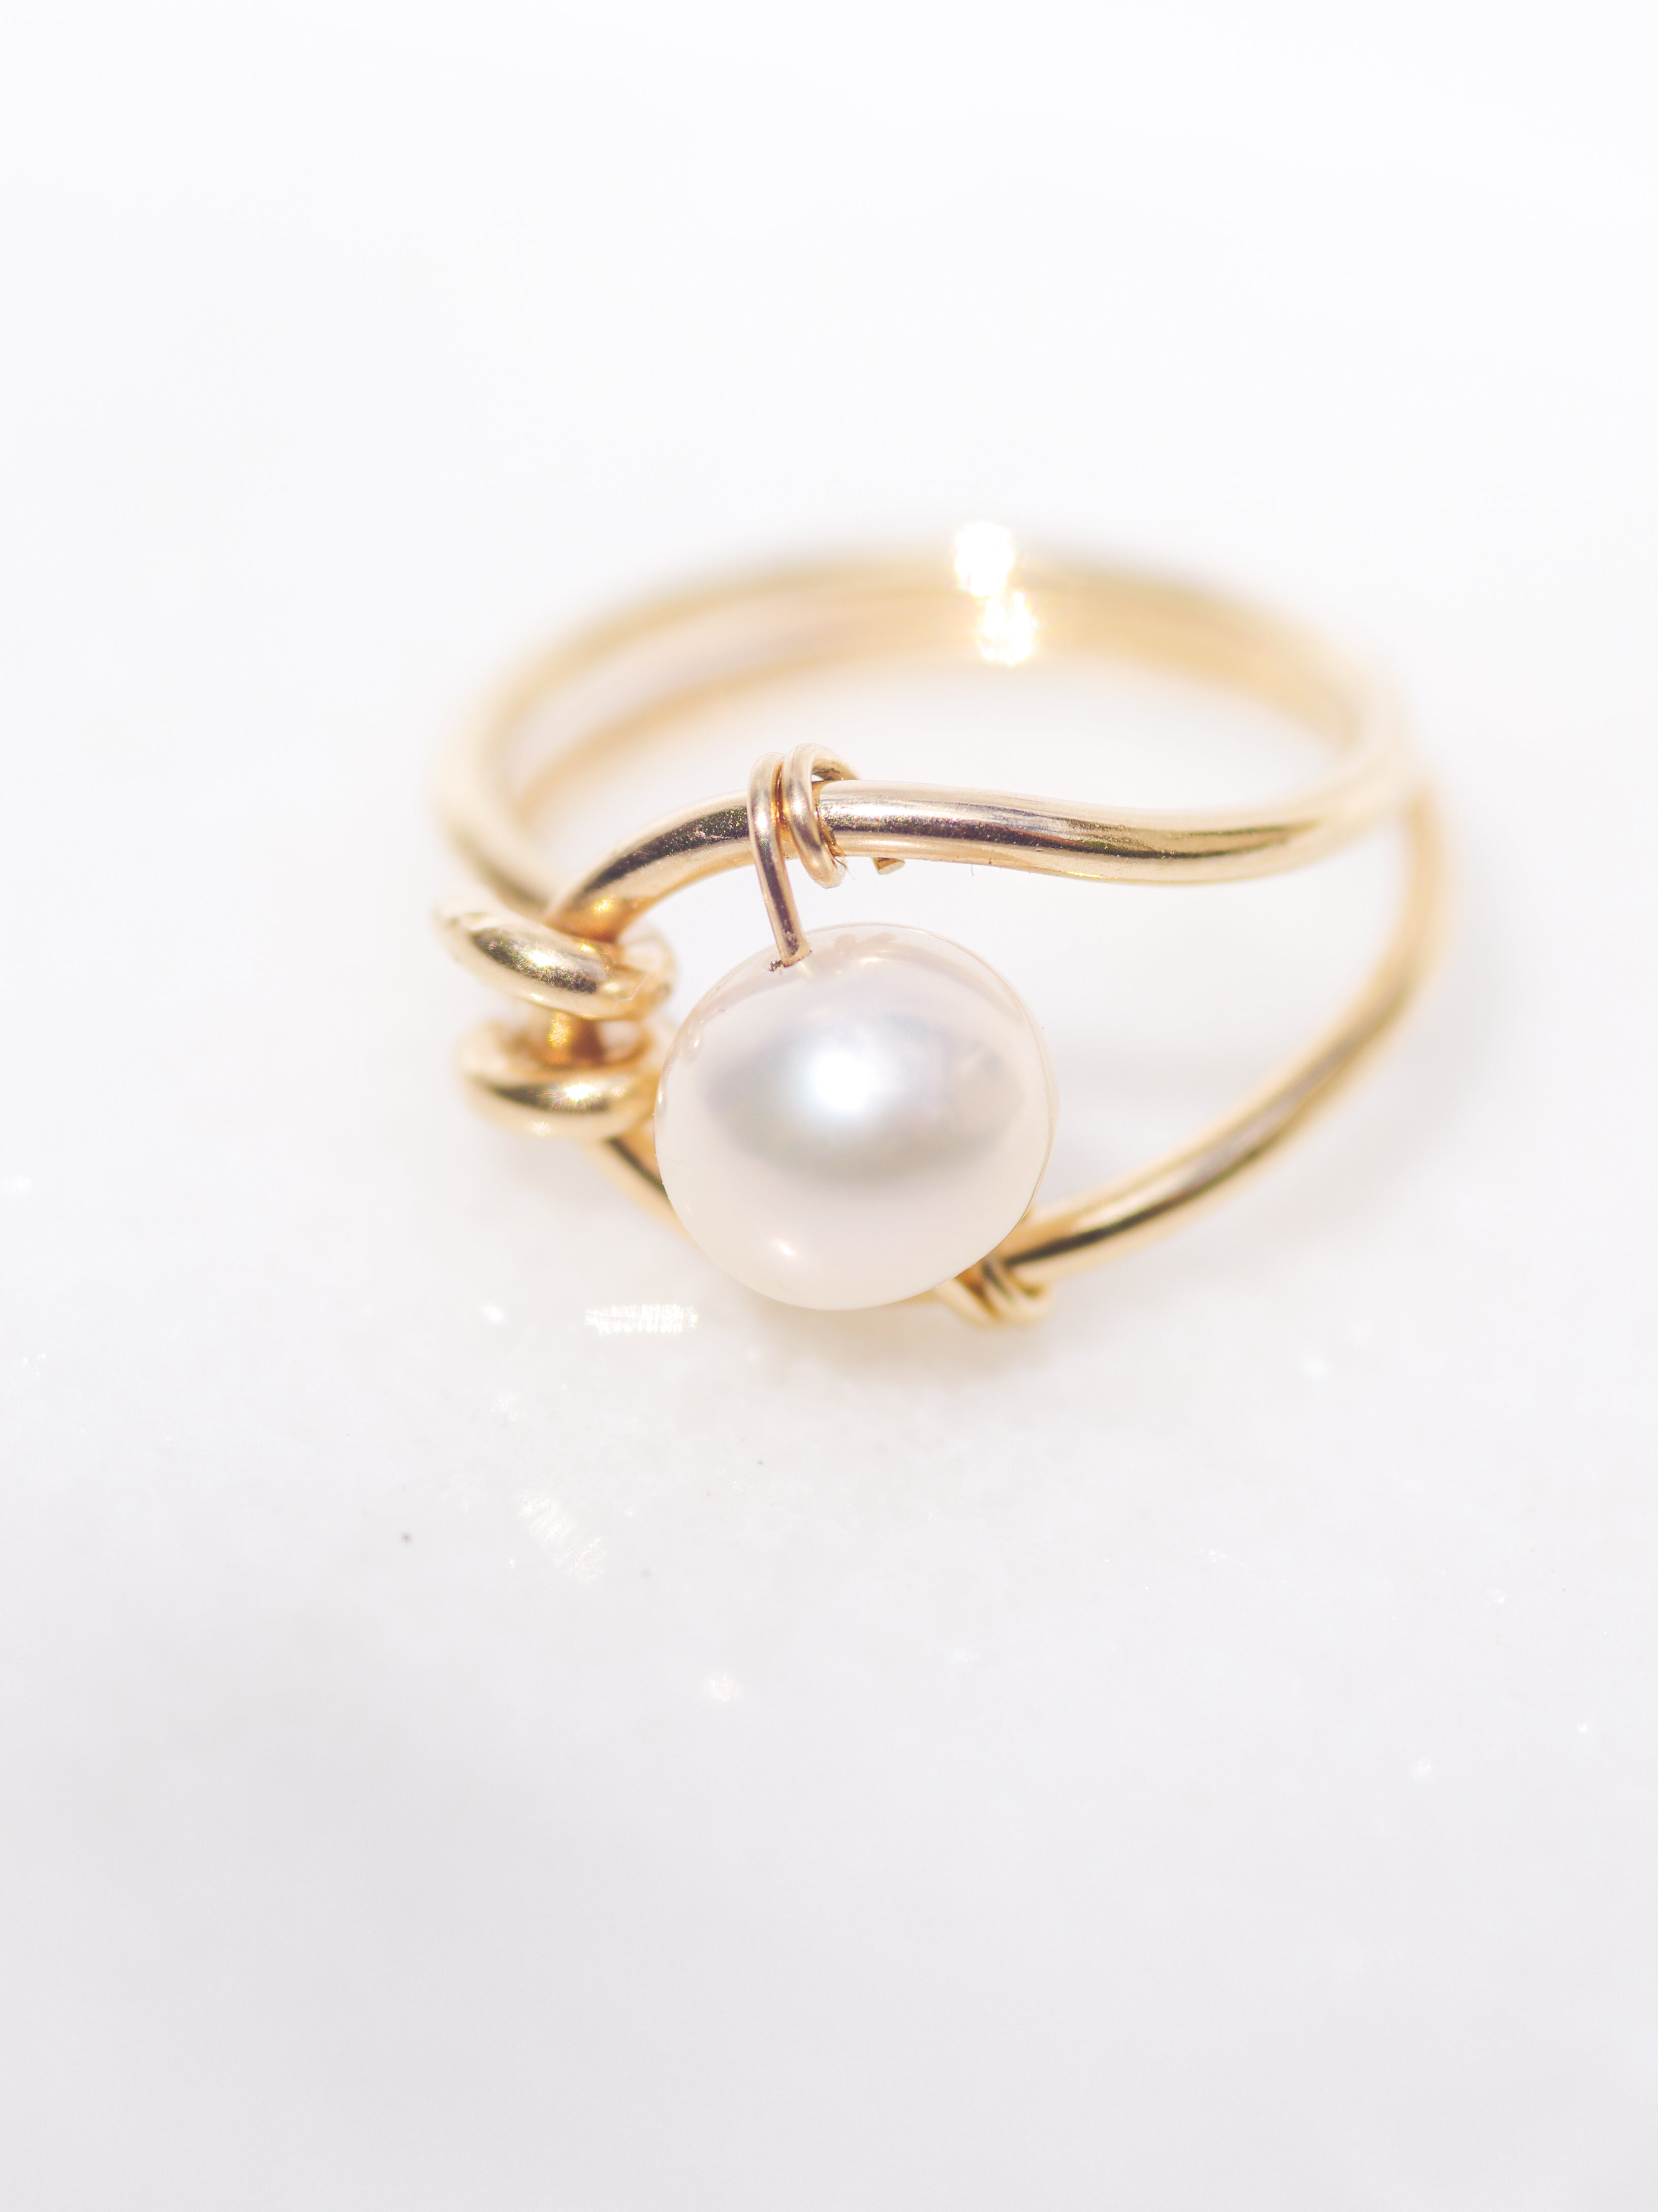 Buy Pearl Ring Online | Suspended Pearl Ring | STAC Fine Jewellery